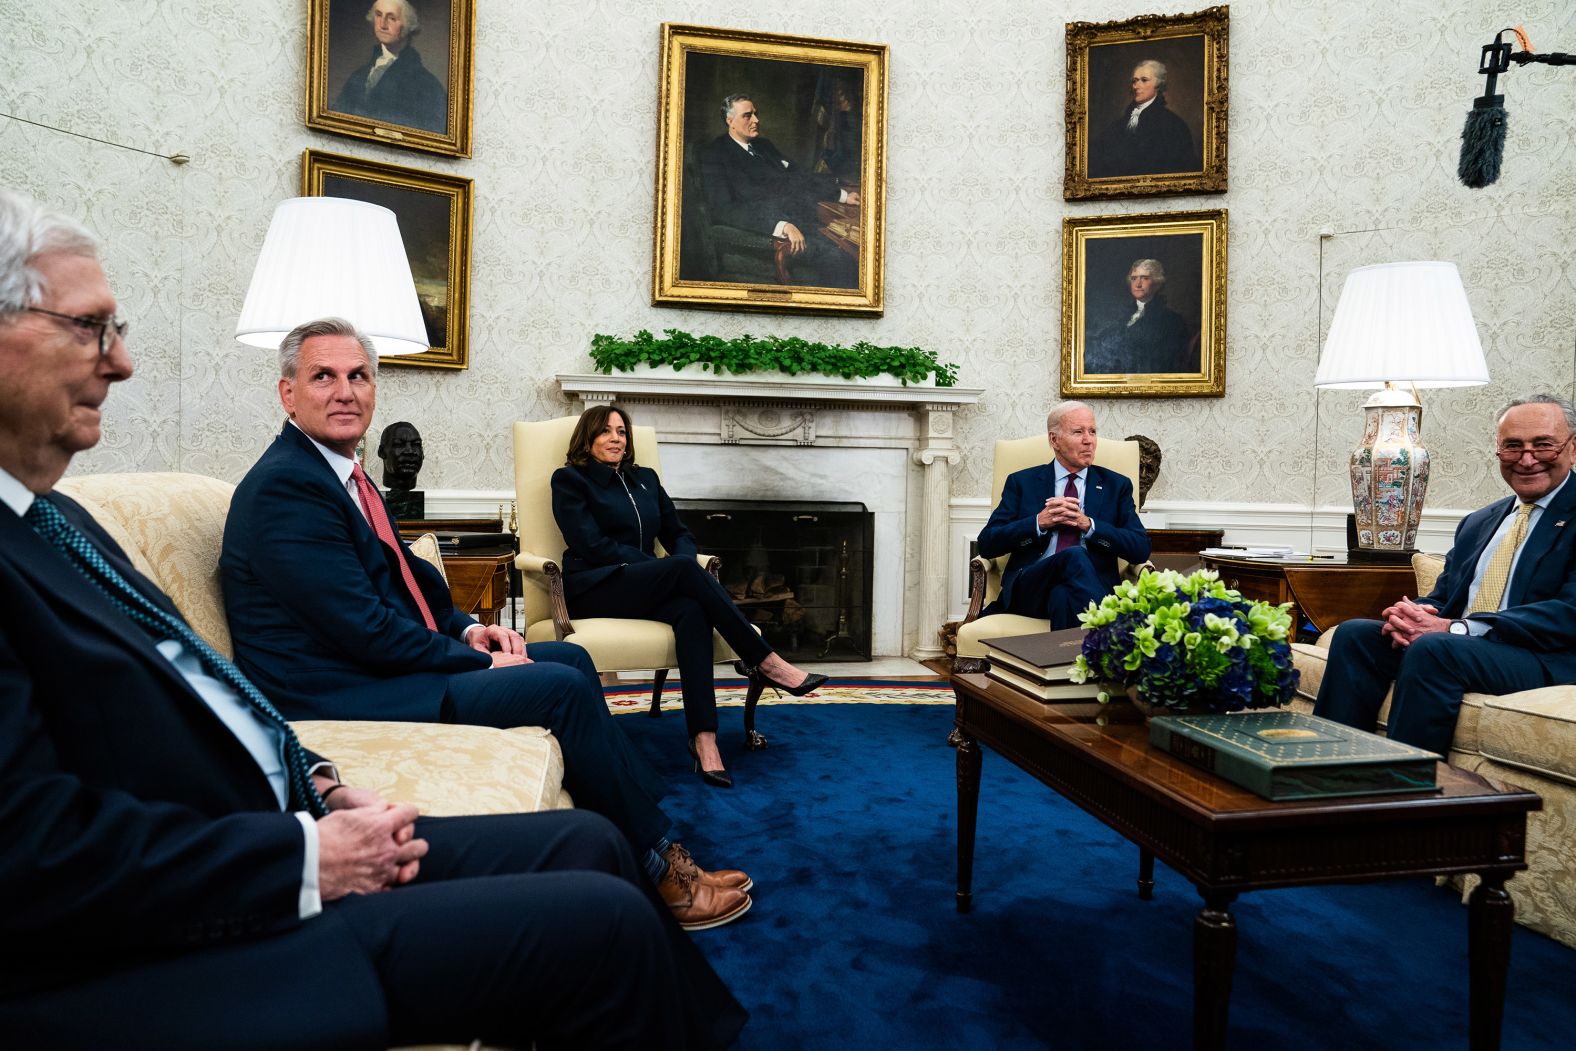 McCarthy, second from left, joins other congressional leaders as <a href="index.php?page=&url=https%3A%2F%2Fwww.cnn.com%2F2023%2F05%2F16%2Fpolitics%2Fbiden-kevin-mccarthy-debt-default-negotiations%2Findex.html" target="_blank">they meet with Biden and Harris</a> in the White House Oval Office in May 2023. They were meeting to talk about a deal to raise the nation's borrowing limit and avoid a historic default.